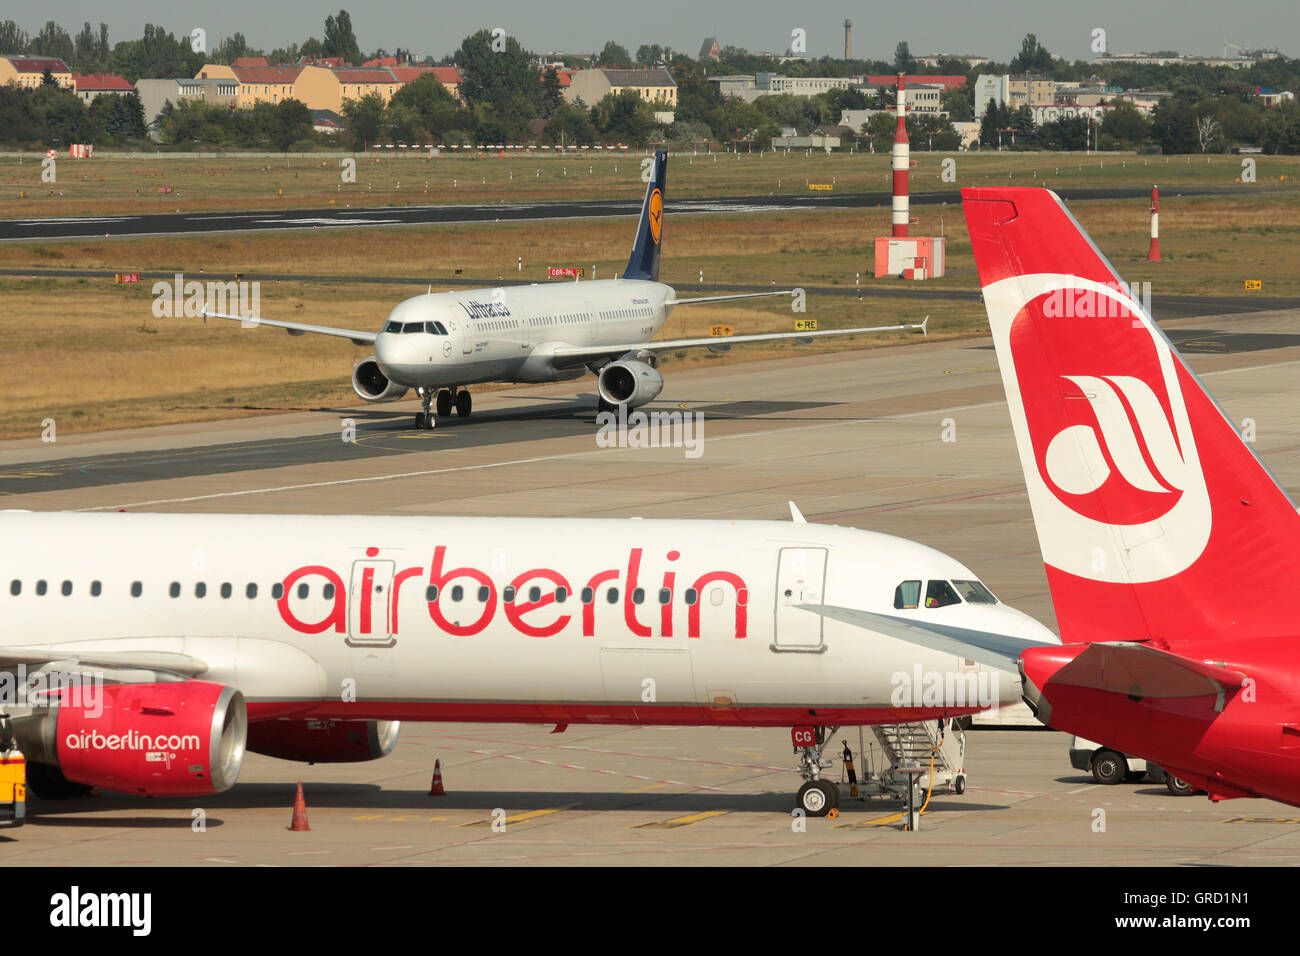 Aircrafts Of Competitors Lufthansa And Airberlin At Tegel Airport Berlin Stock Photo